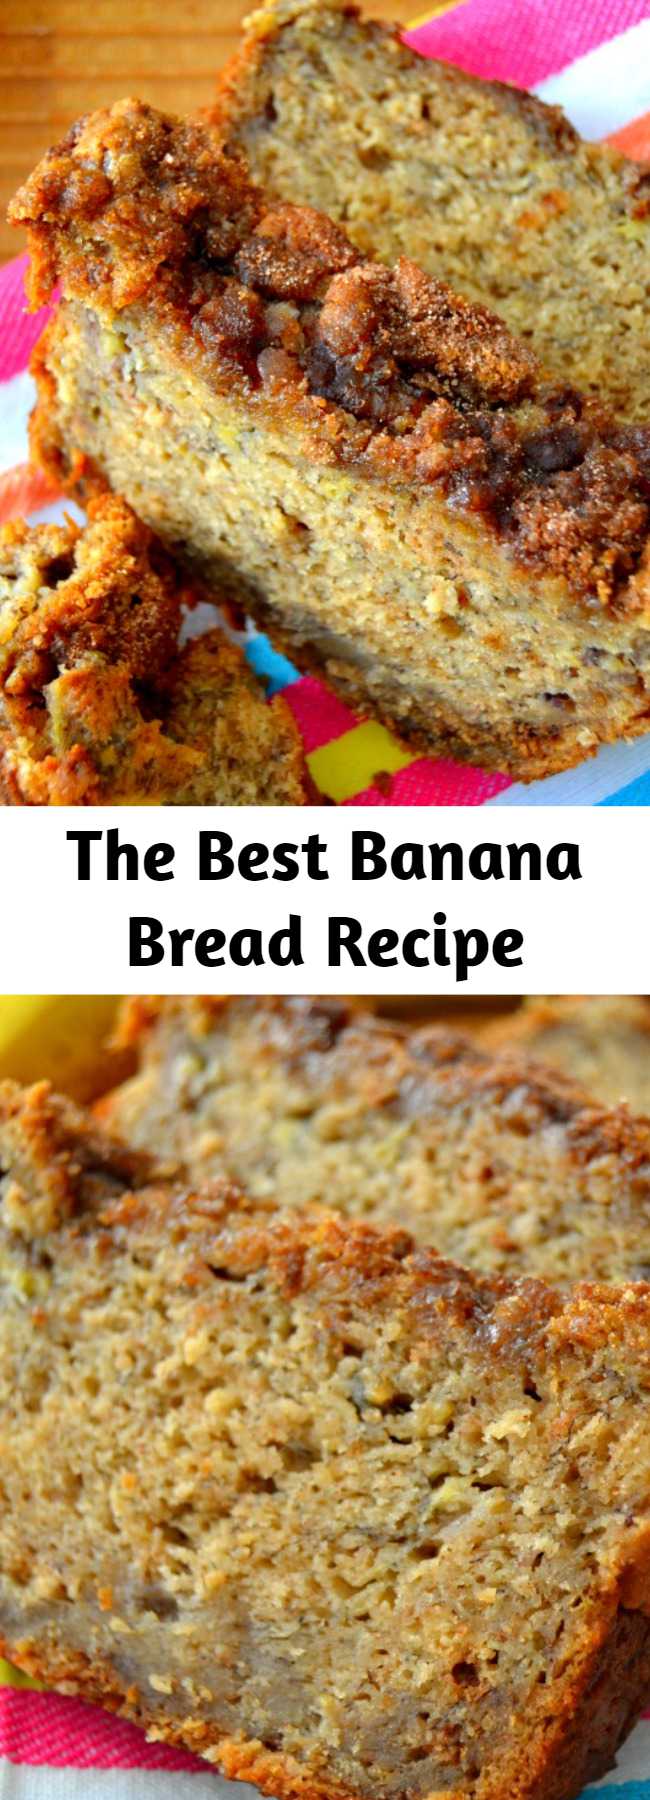 The Best Banana Bread Recipe - If you're tired of eating crumbly, dry, flavorless banana bread, you're in luck: this recipe is bursting with fresh bananas, is swirled with bits of cinnamon and is topped with the most irresistible brown sugar crust. Super soft and tender, moist without being wet.